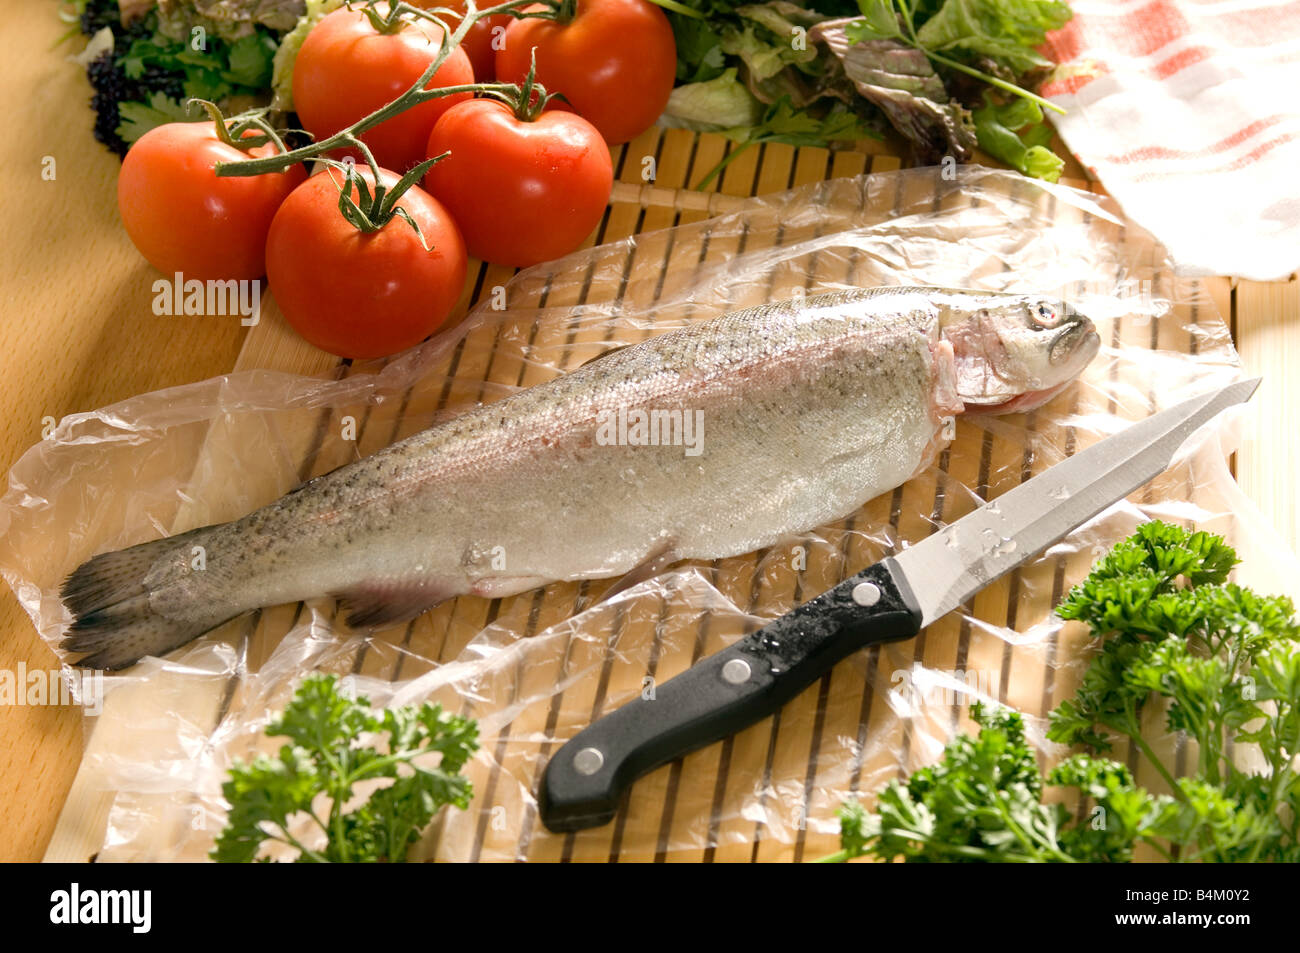 a fresh rainbow trout being prepared for cooking Stock Photo